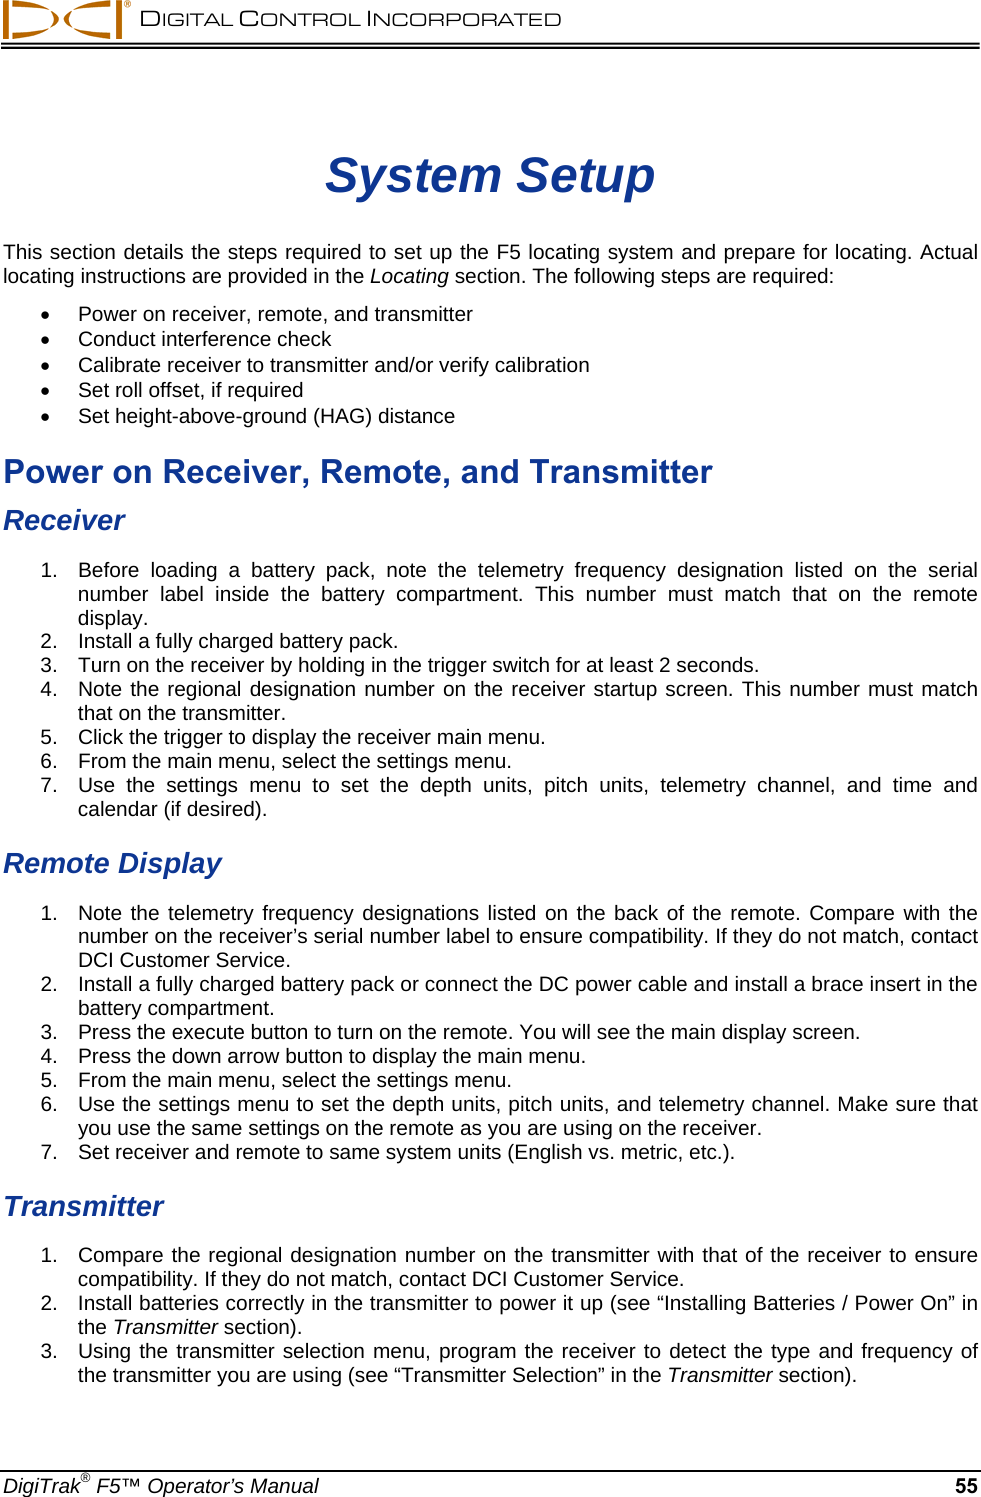  DIGITAL CONTROL INCORPORATED  DigiTrak® F5™ Operator’s Manual 55 System Setup This section details the steps required to set up the F5 locating system and prepare for locating. Actual locating instructions are provided in the Locating section. The following steps are required:   Power on receiver, remote, and transmitter    Conduct interference check    Calibrate receiver to transmitter and/or verify calibration   Set roll offset, if required   Set height-above-ground (HAG) distance Power on Receiver, Remote, and Transmitter Receiver 1.  Before loading a battery pack, note the telemetry frequency designation listed on the serial number label inside the battery compartment. This number must match that on the remote display. 2.  Install a fully charged battery pack.  3.  Turn on the receiver by holding in the trigger switch for at least 2 seconds.  4.  Note the regional designation number on the receiver startup screen. This number must match that on the transmitter. 5.  Click the trigger to display the receiver main menu. 6.  From the main menu, select the settings menu. 7.  Use the settings menu to set the depth units, pitch units, telemetry channel, and time and calendar (if desired).  Remote Display 1.  Note the telemetry frequency designations listed on the back of the remote. Compare with the number on the receiver’s serial number label to ensure compatibility. If they do not match, contact DCI Customer Service. 2.  Install a fully charged battery pack or connect the DC power cable and install a brace insert in the battery compartment. 3.  Press the execute button to turn on the remote. You will see the main display screen. 4.  Press the down arrow button to display the main menu. 5.  From the main menu, select the settings menu. 6.  Use the settings menu to set the depth units, pitch units, and telemetry channel. Make sure that you use the same settings on the remote as you are using on the receiver.  7.  Set receiver and remote to same system units (English vs. metric, etc.).  Transmitter 1.  Compare the regional designation number on the transmitter with that of the receiver to ensure compatibility. If they do not match, contact DCI Customer Service. 2.  Install batteries correctly in the transmitter to power it up (see “Installing Batteries / Power On” in the Transmitter section). 3.  Using the transmitter selection menu, program the receiver to detect the type and frequency of the transmitter you are using (see “Transmitter Selection” in the Transmitter section). 